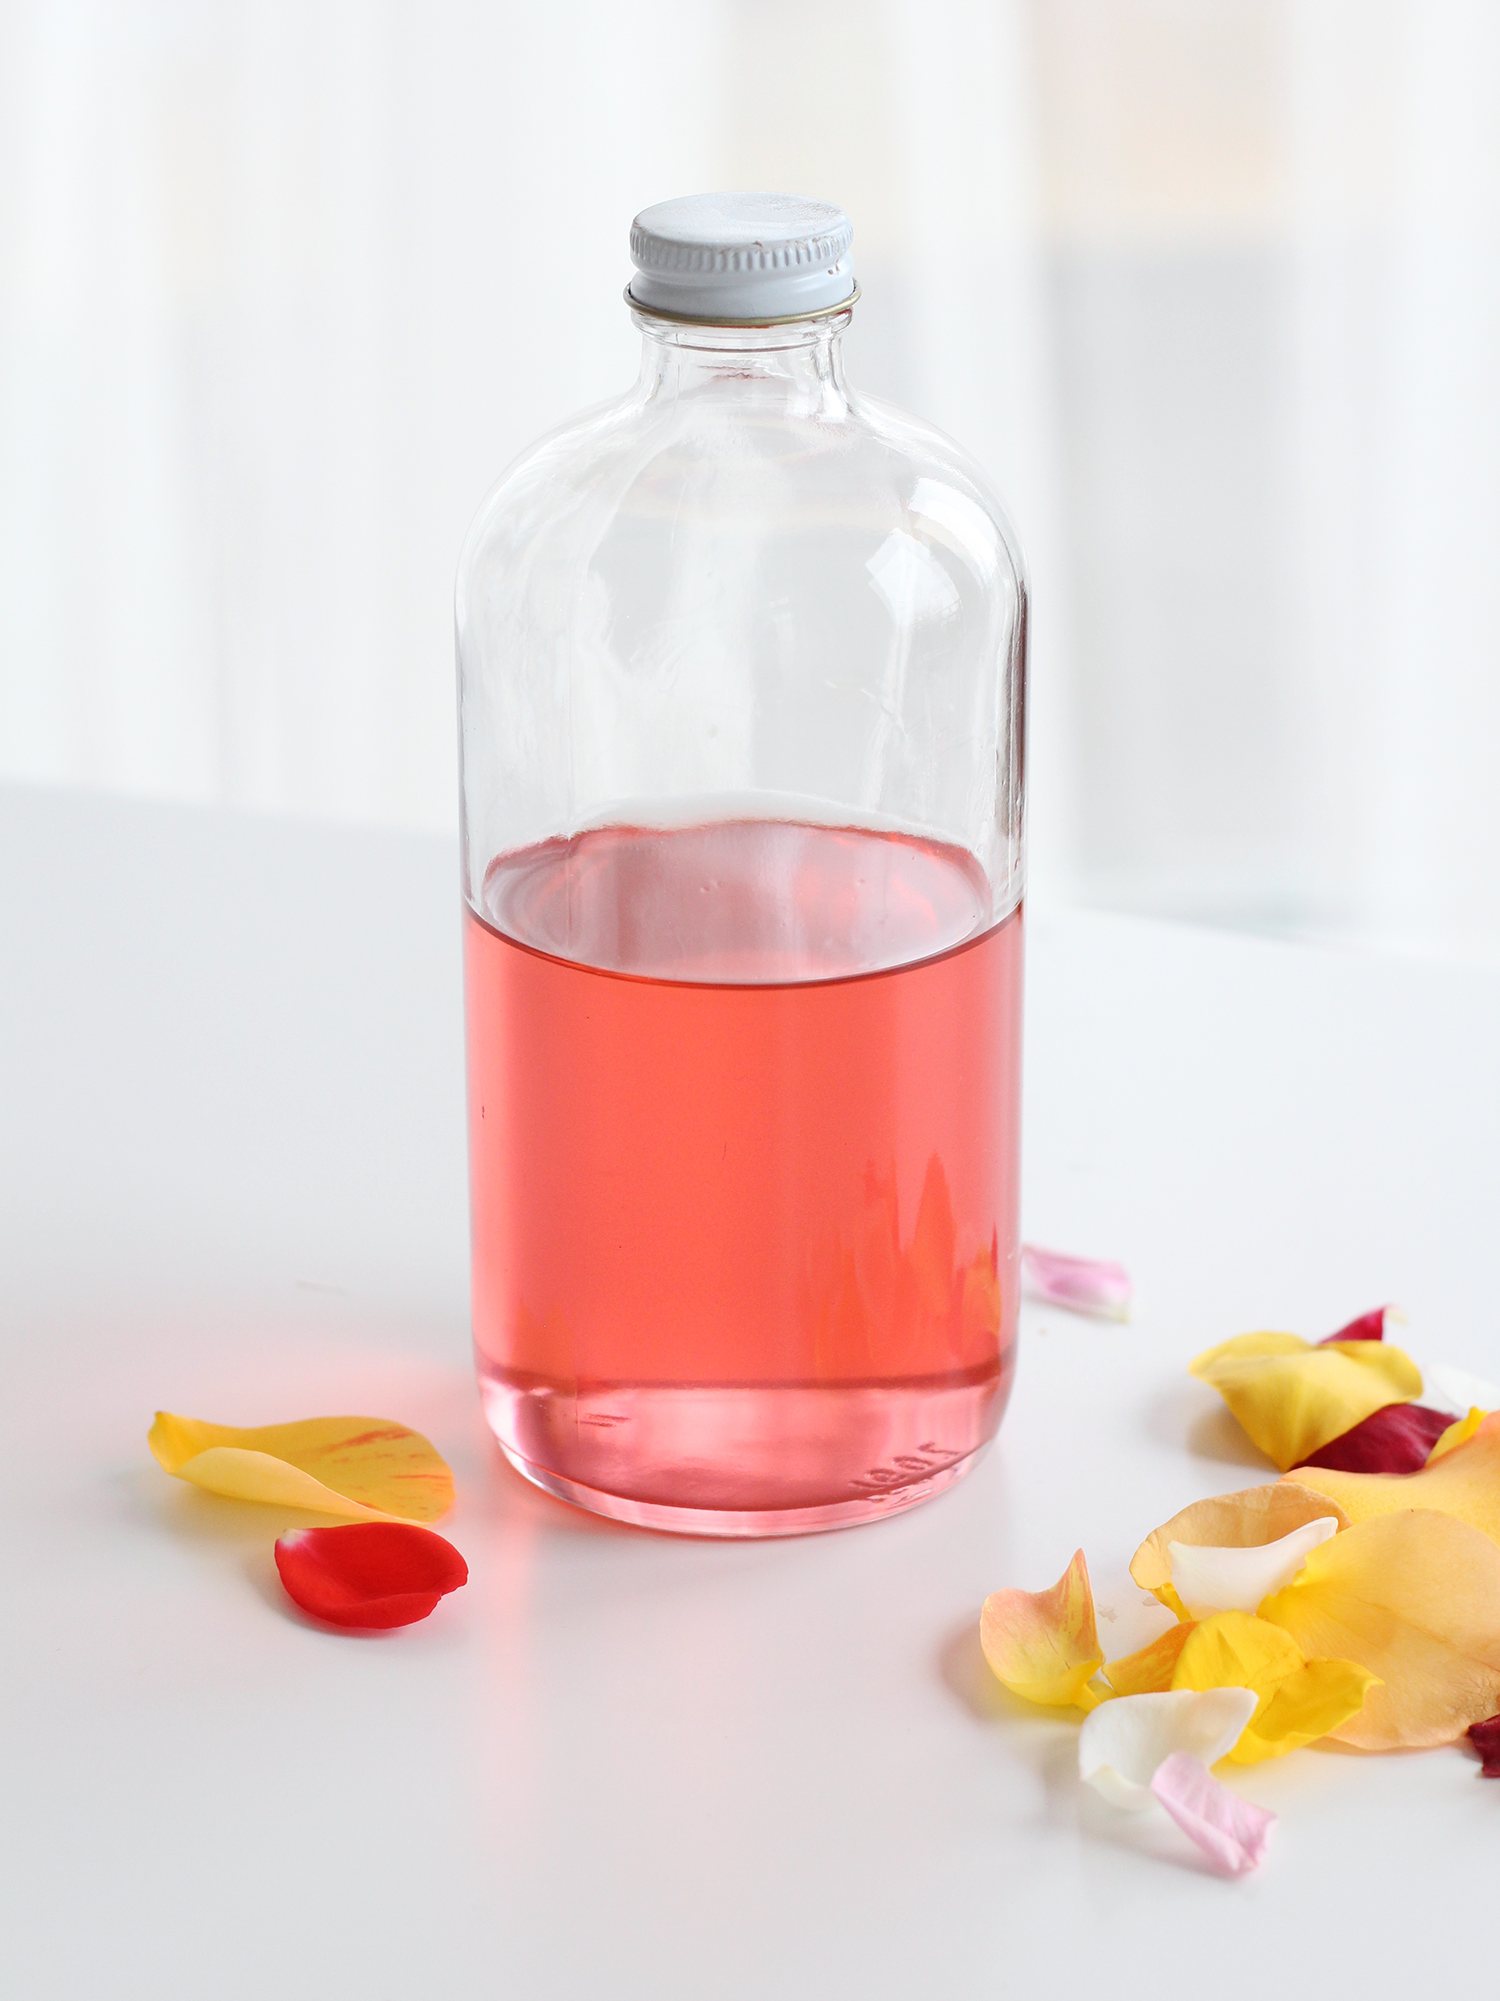 How to make homemade rose simple syrup on Lily & Val Living